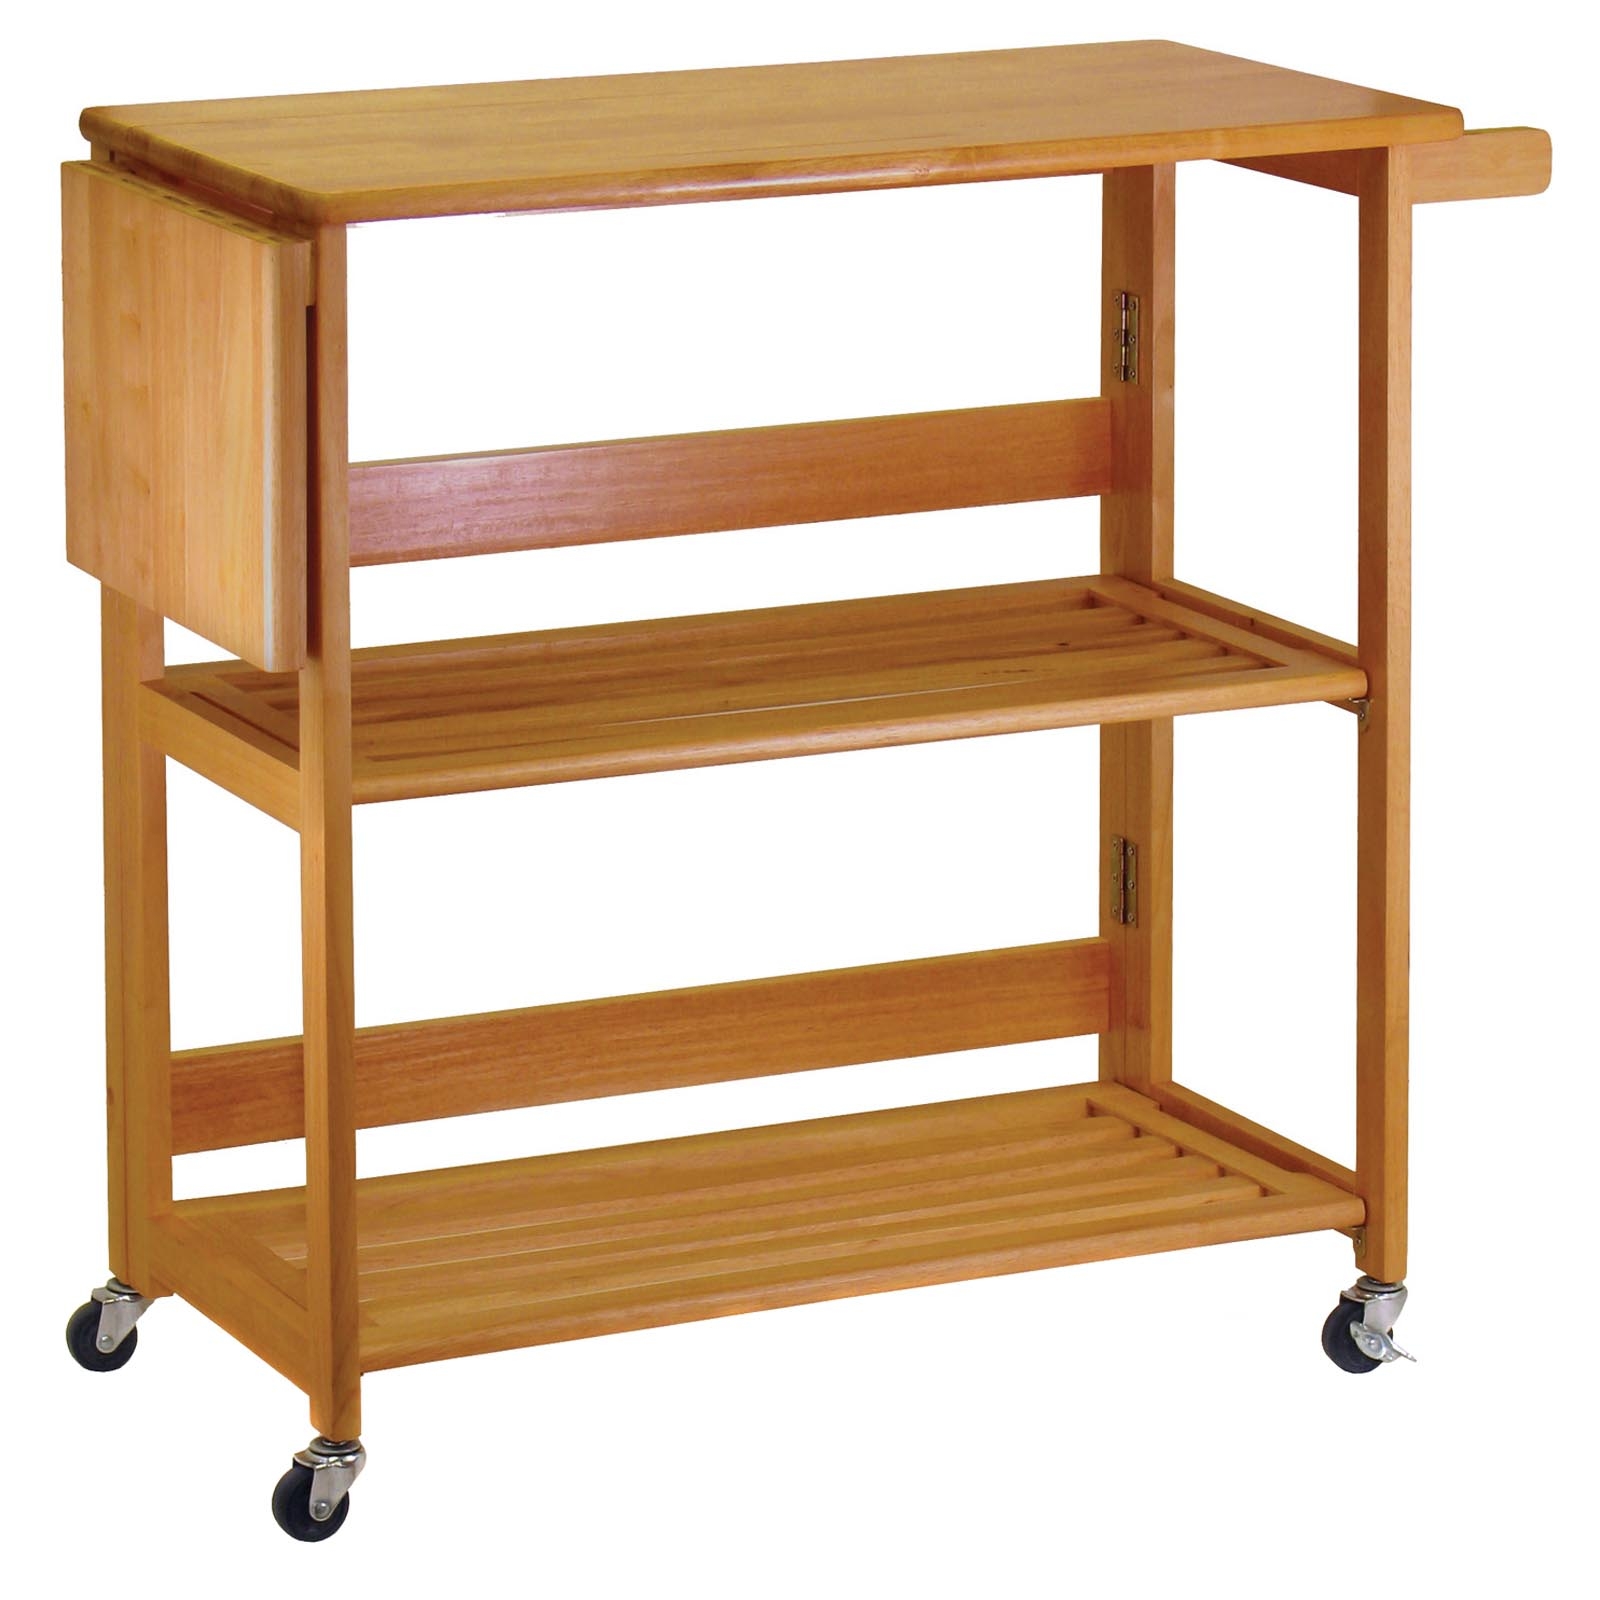 Kitchen Cart Foldable With Shelves By Winsome Wood